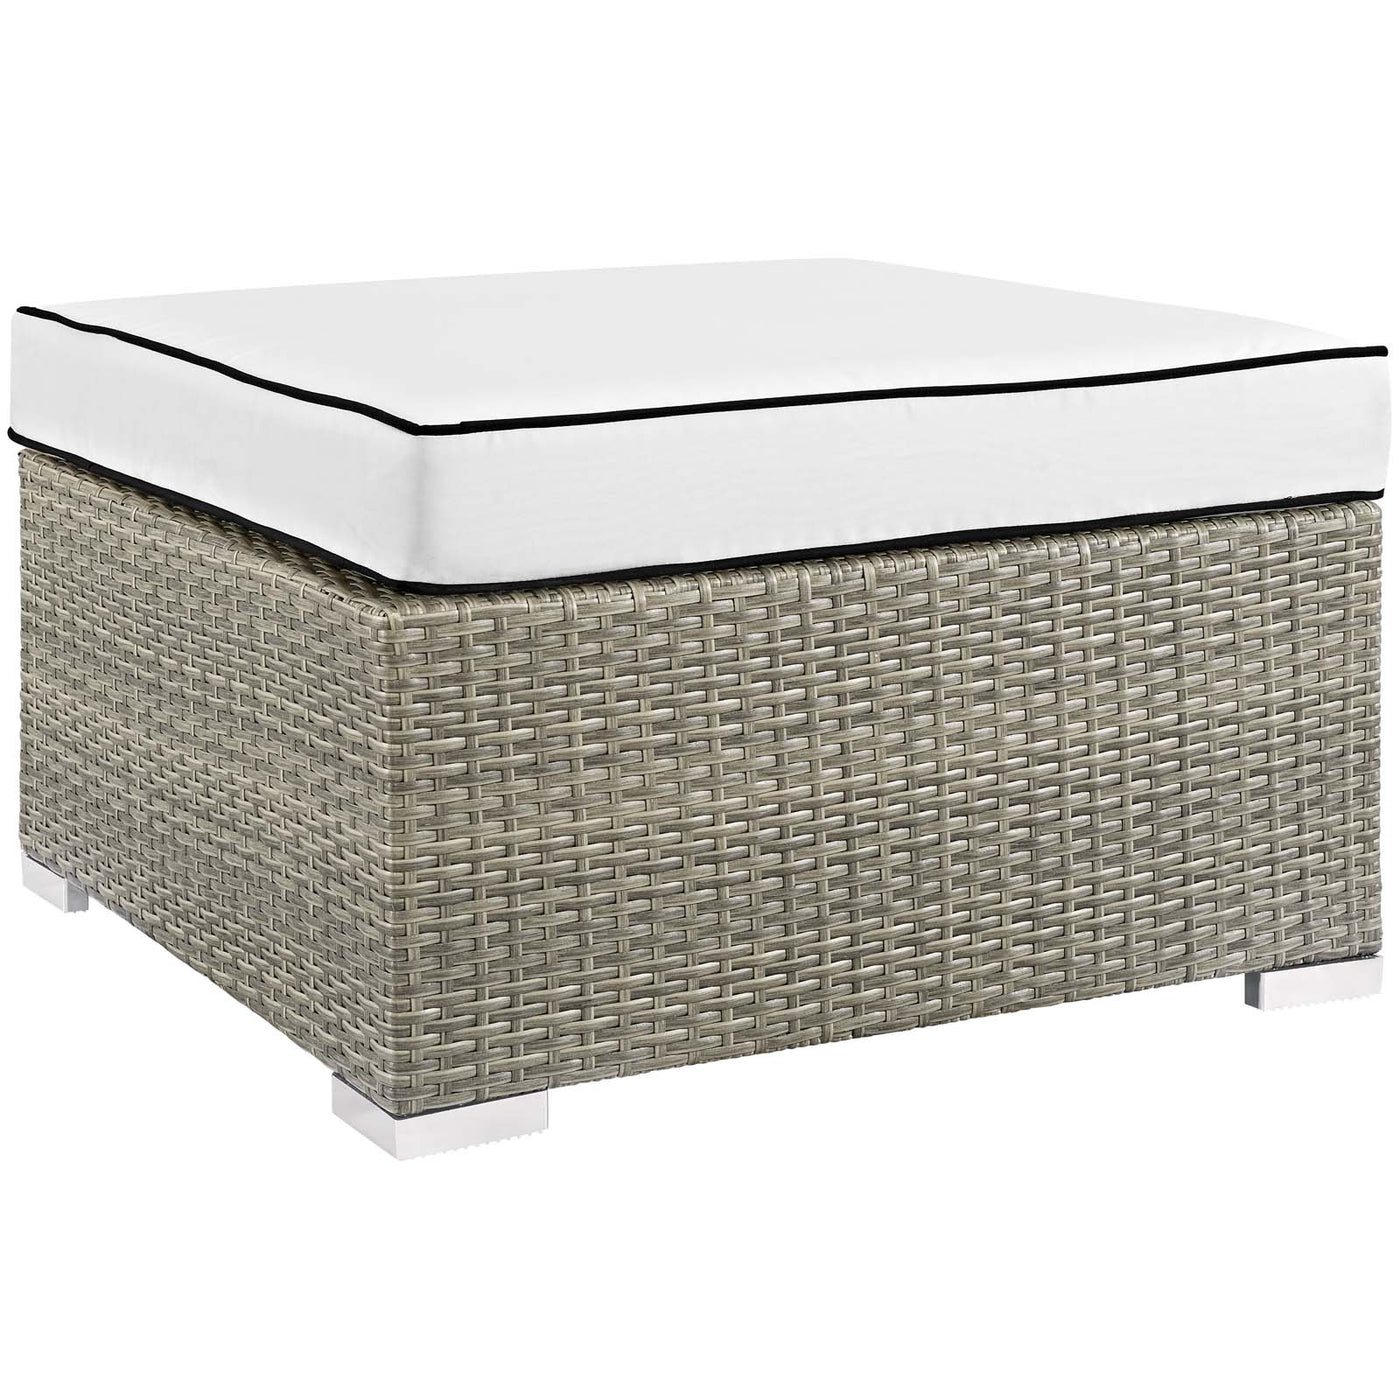 Repose Outdoor Patio Upholstered Fabric Ottoman